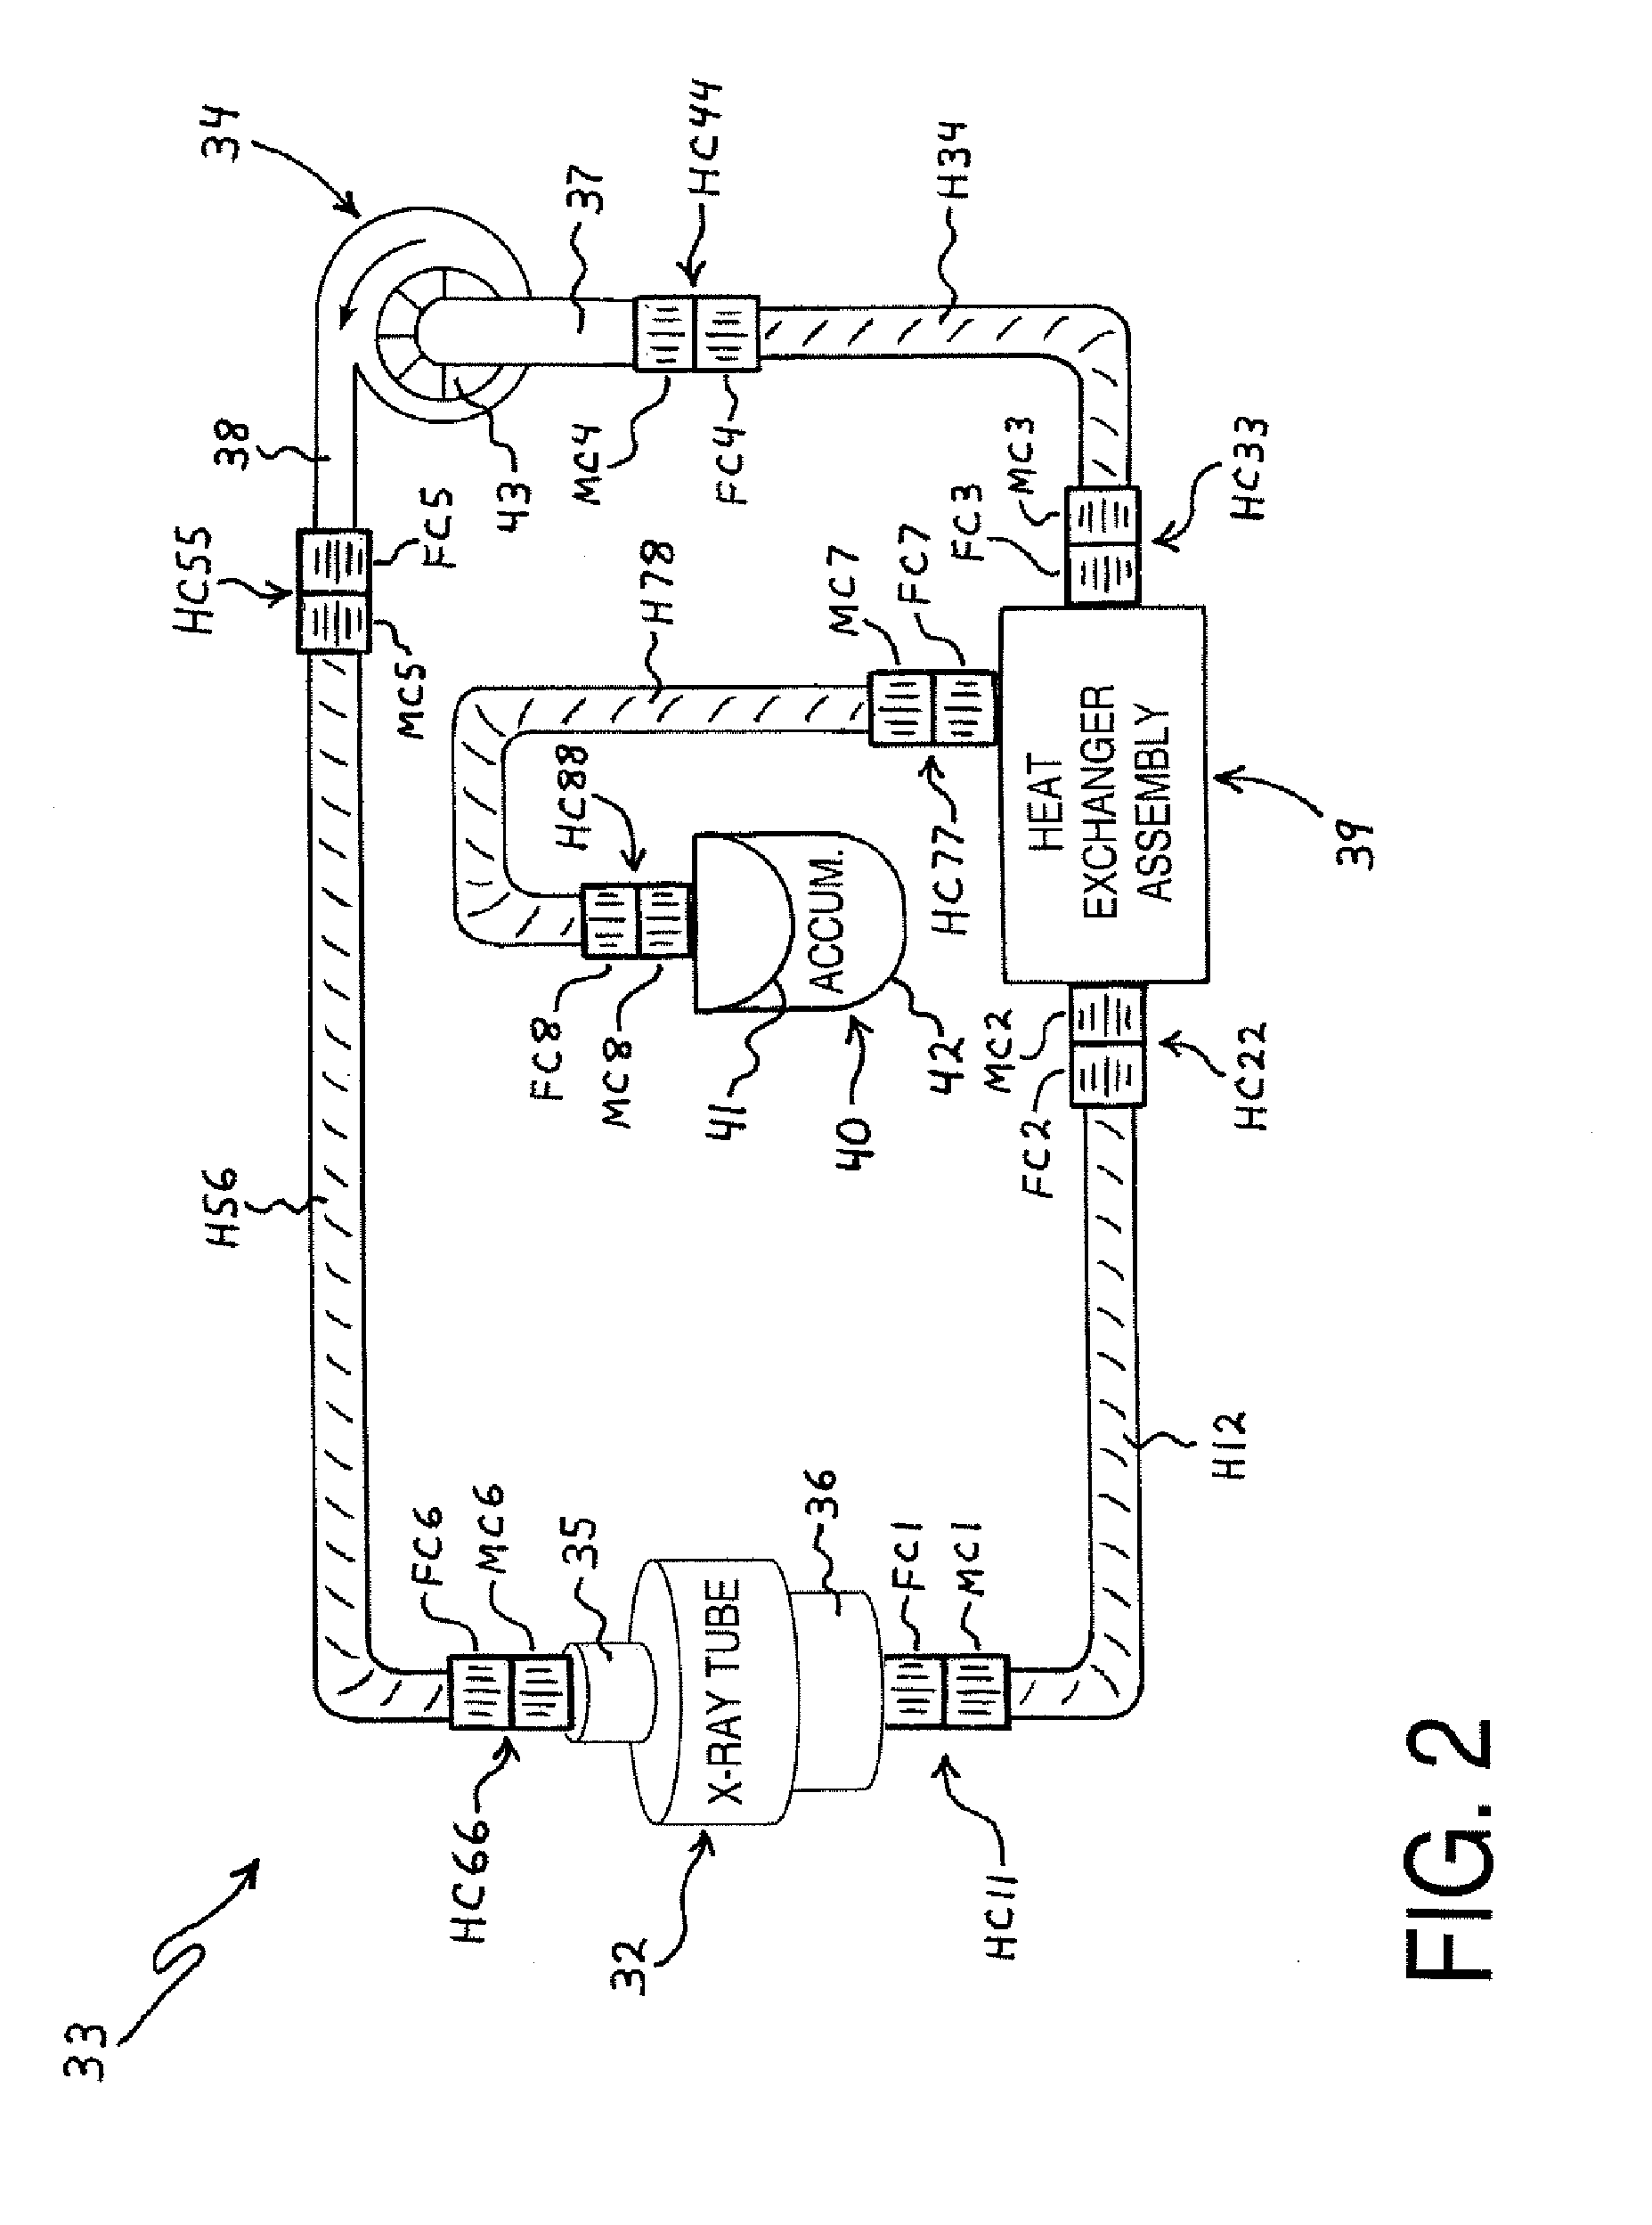 Tool for transferring controlled amounts of fluid into and from a fluid flow circuit